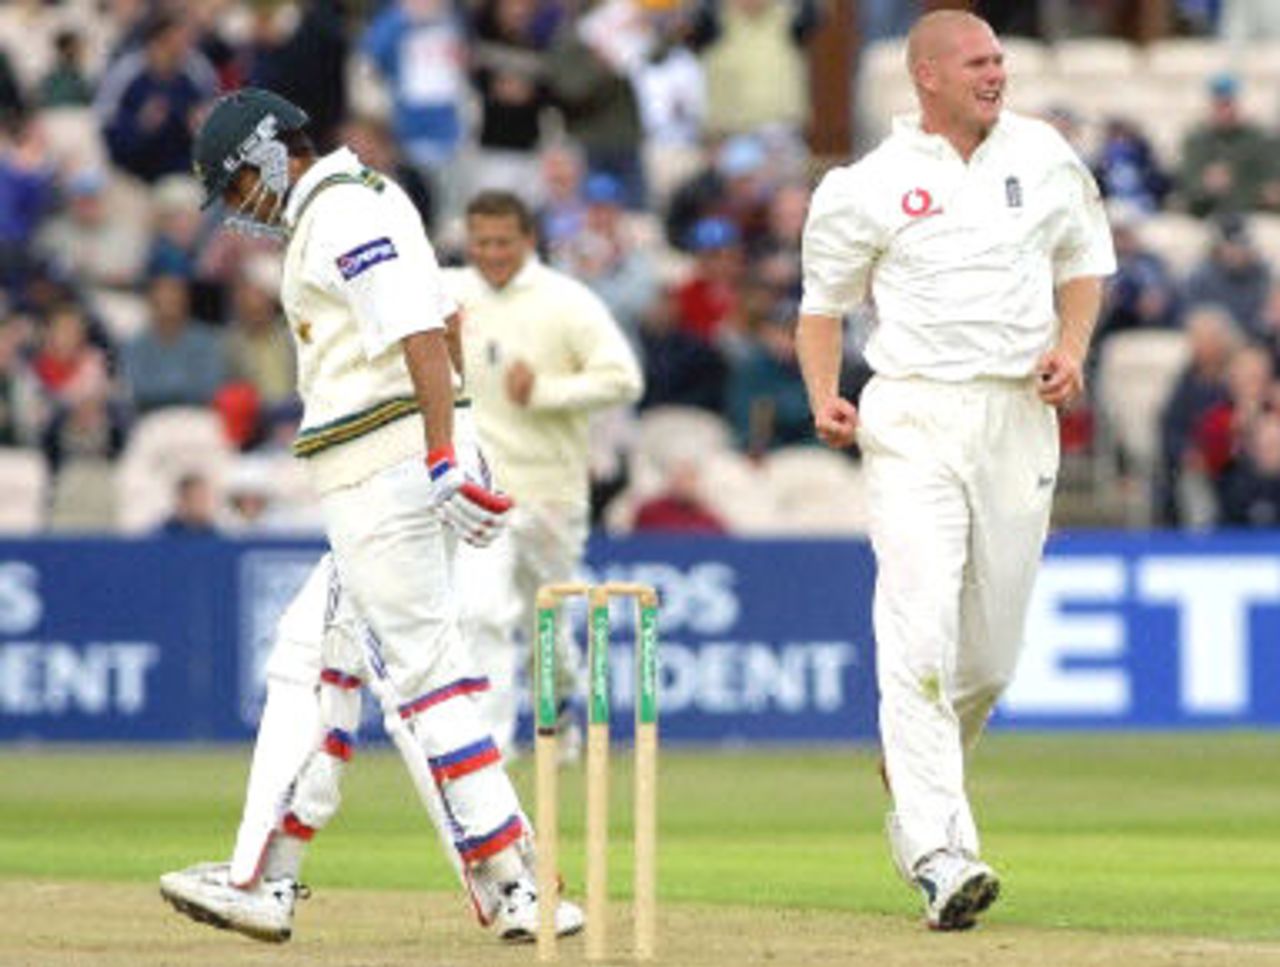 Hoggard celebrates the dismissal of Younis Khan by a LBW, day 1, 2nd Test at Old Trafford, 31May - 4 June 2001.